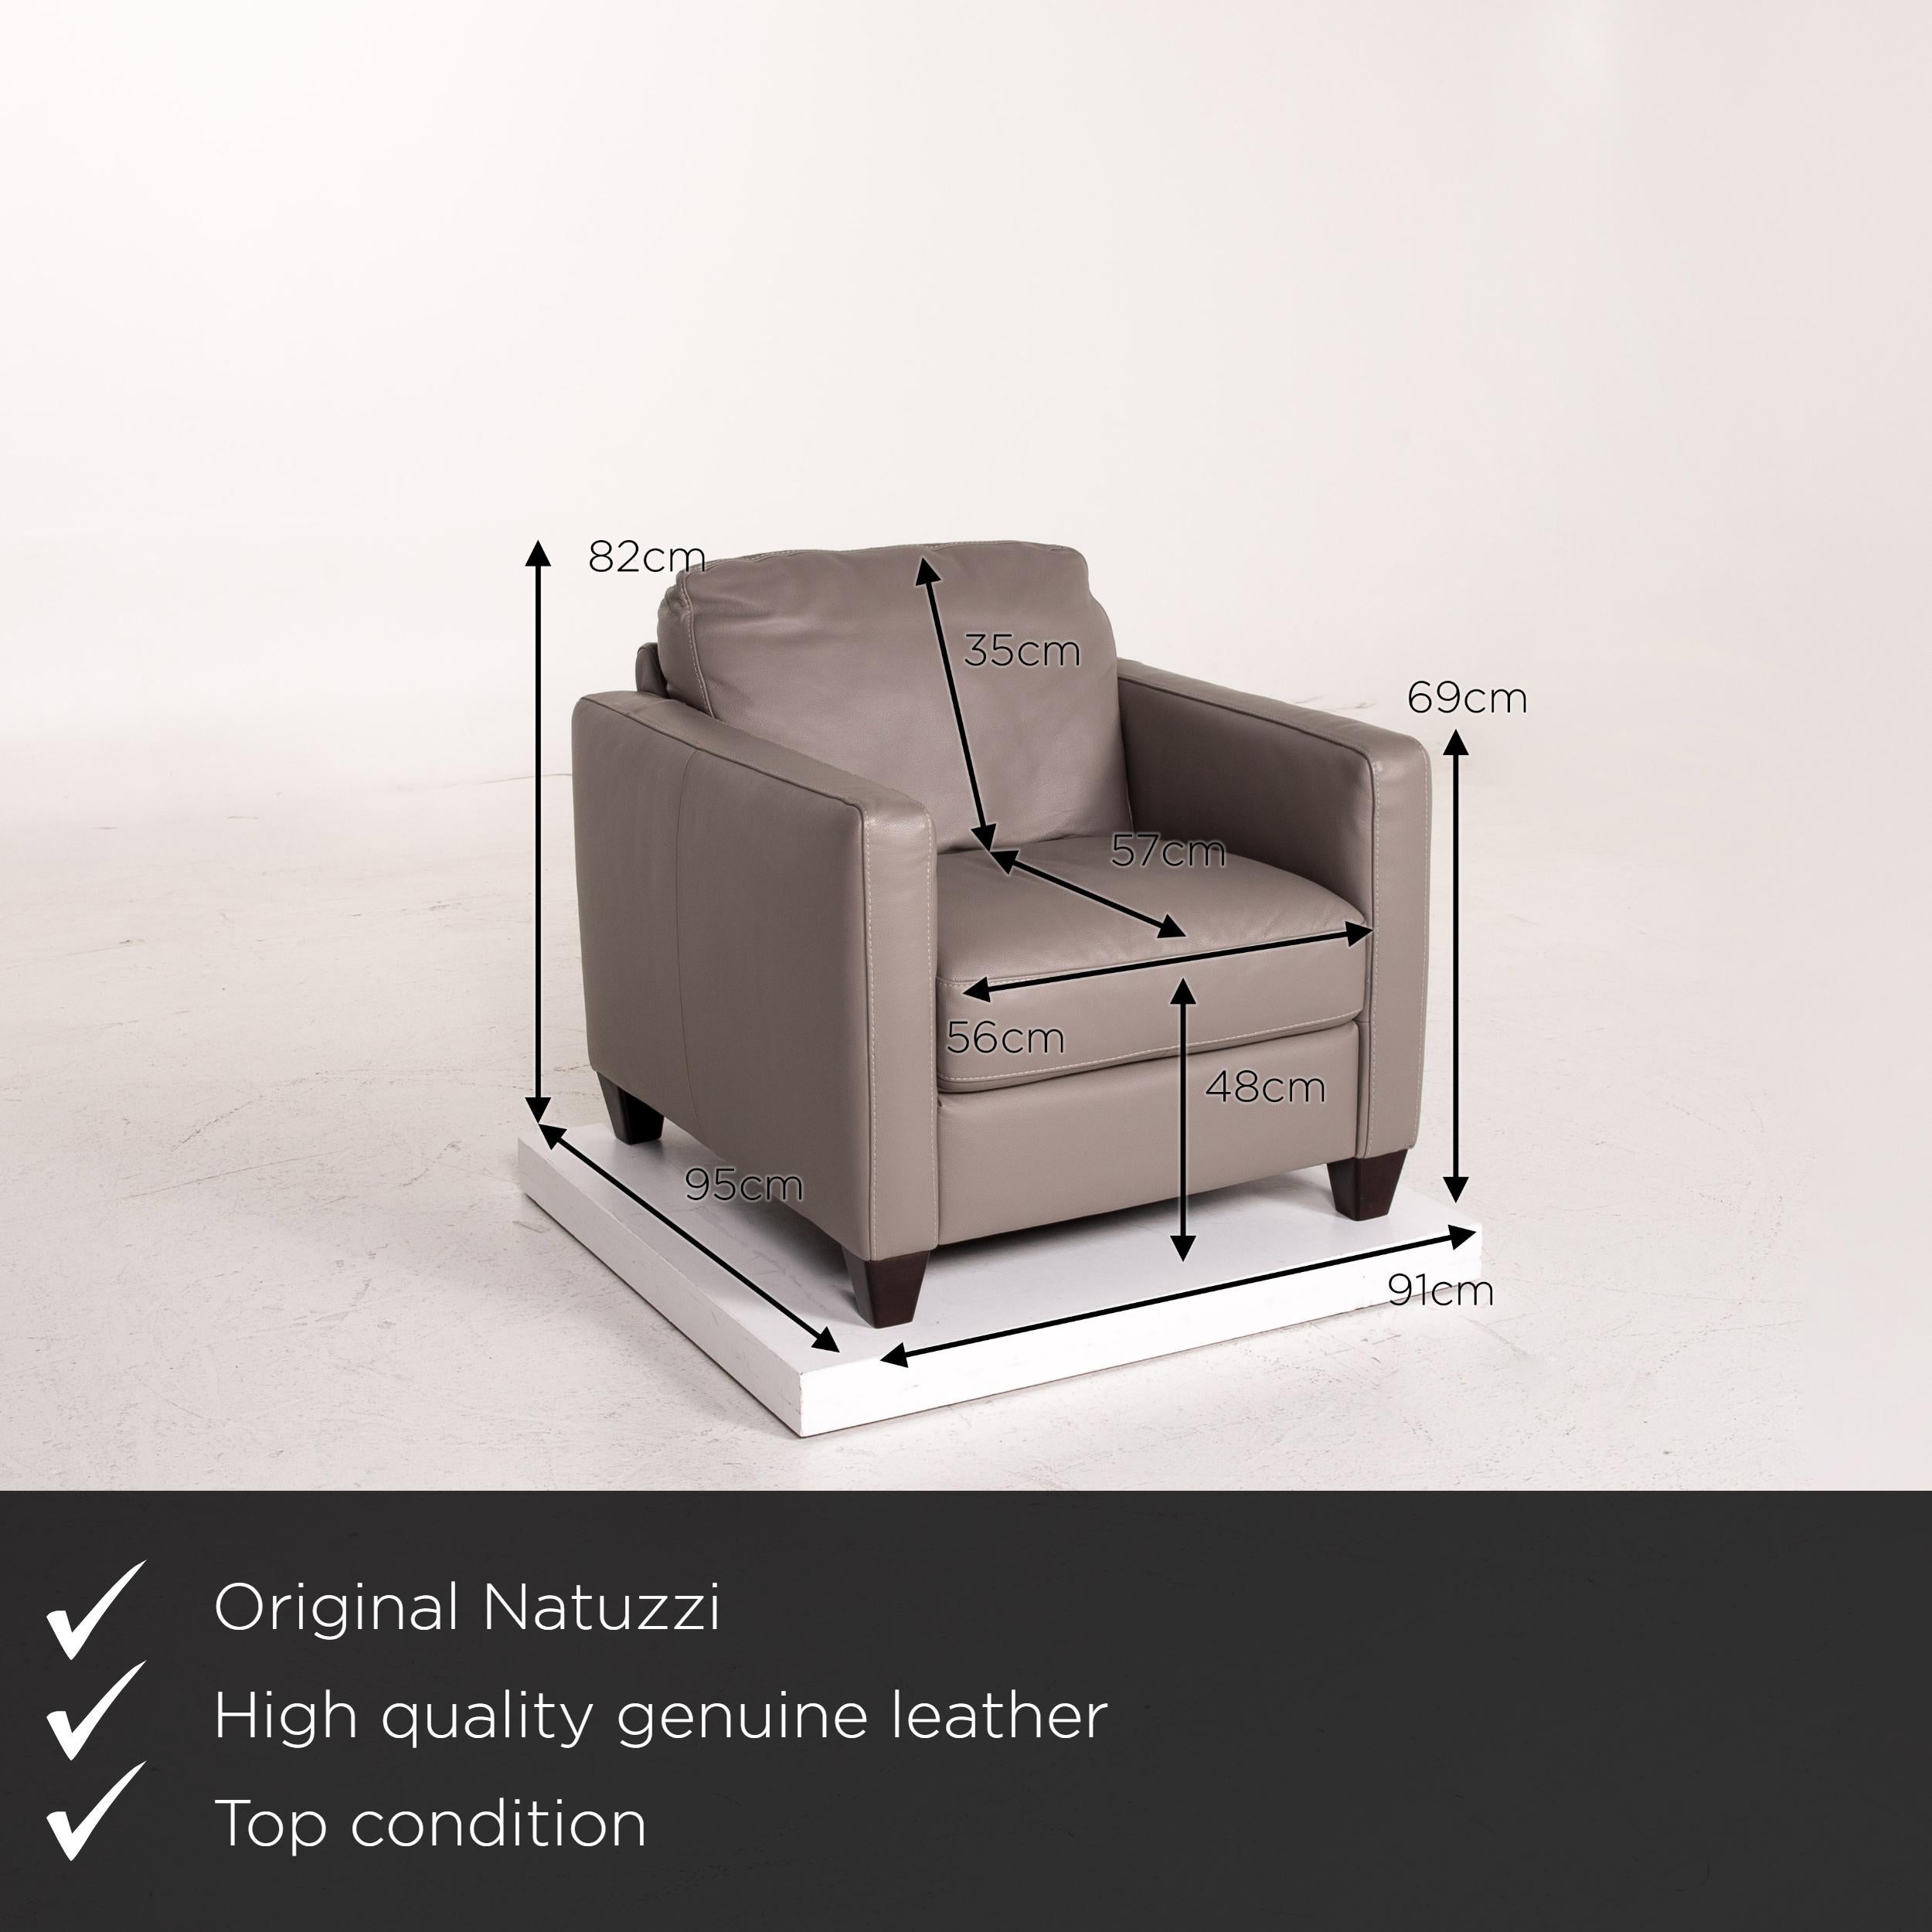 We present to you a Natuzzi leather armchair set gray 2 armchairs.


 Product measurements in centimeters:
 

Depth 95
Width 91
Height 82
Seat height 48
Rest height 69
Seat depth 57
Seat width 56
Back height 35.
 